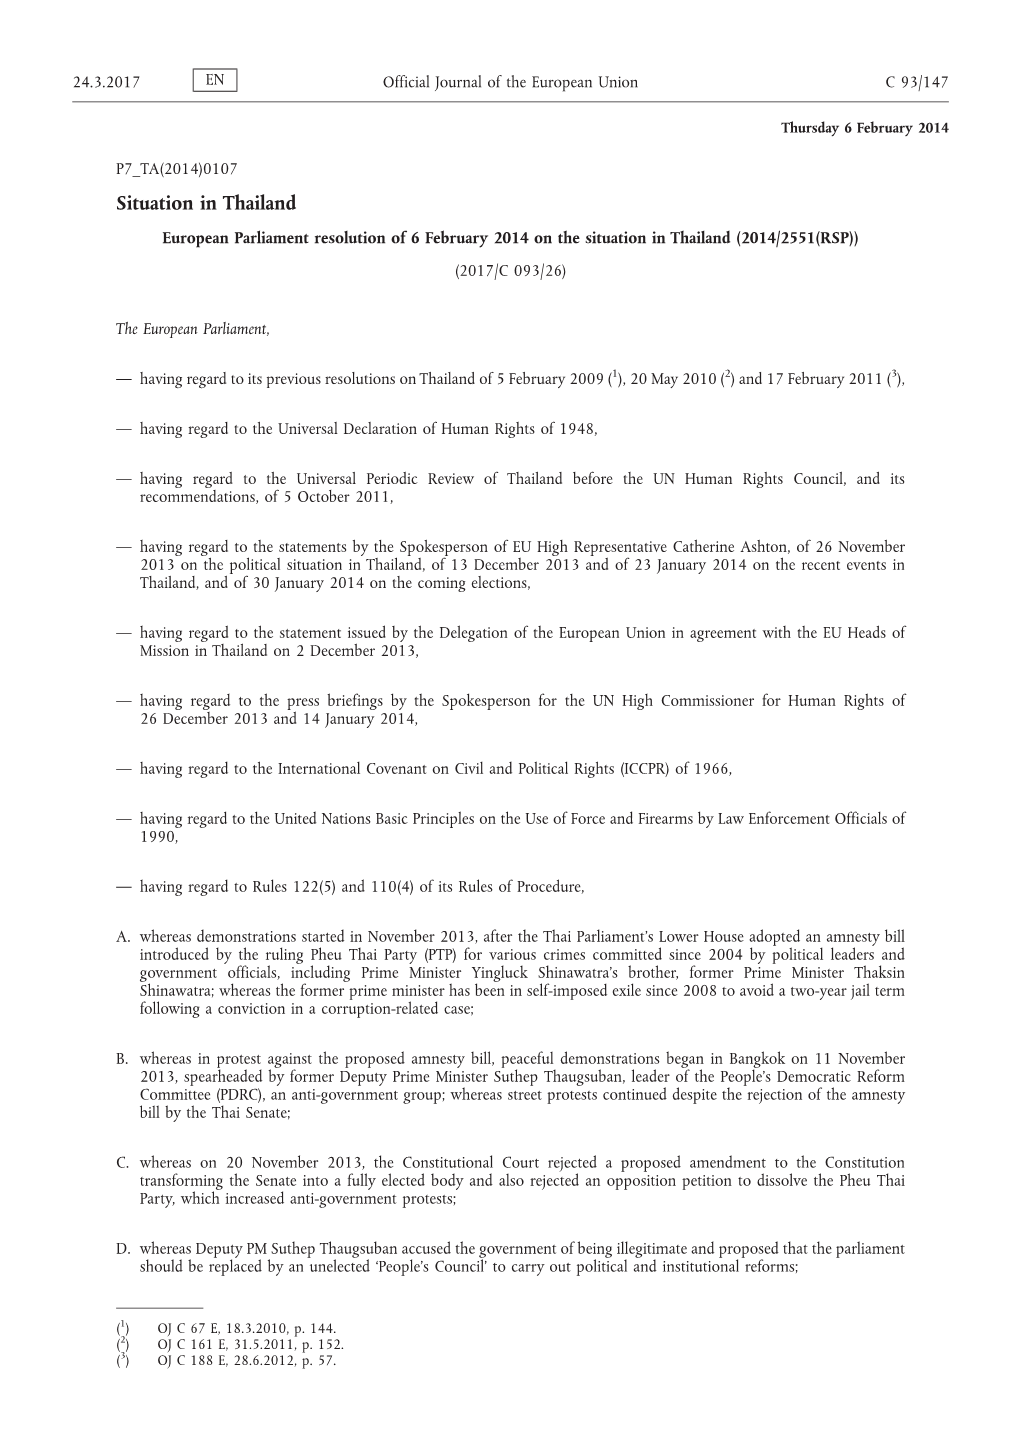 European Parliament Resolution of 6 February 2014 on the Situation in Thailand (2014/2551(RSP)) (2017/C 093/26)